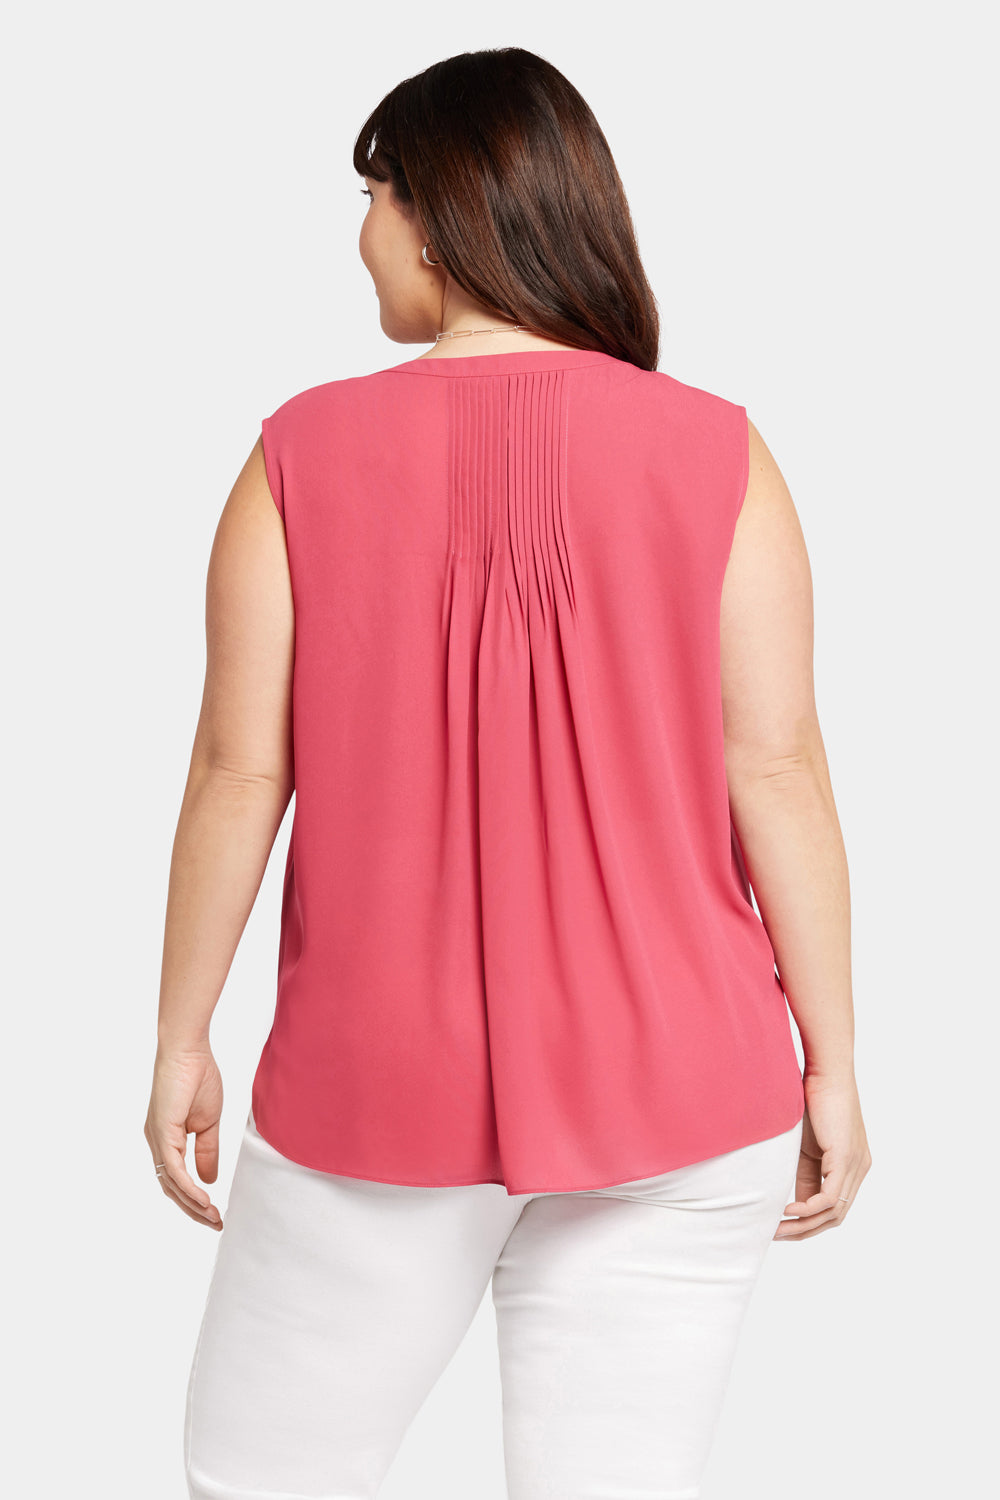 Sleeveless Pintuck Blouse In Plus Size - Raspberry Pink Pink | NYDJ